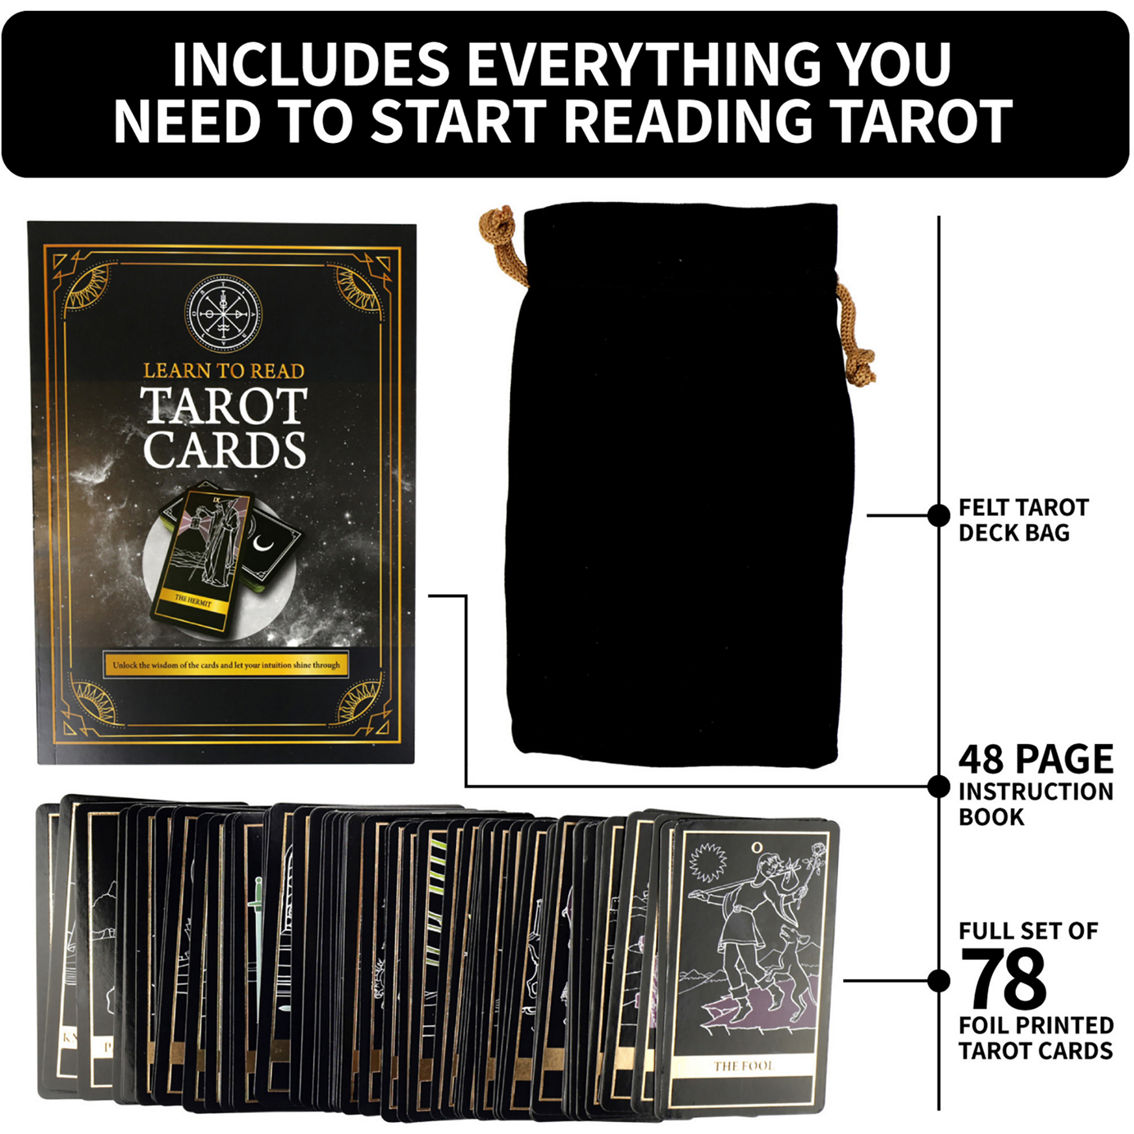 SpiceBox Gift Box: Tarot Cards - Image 5 of 7